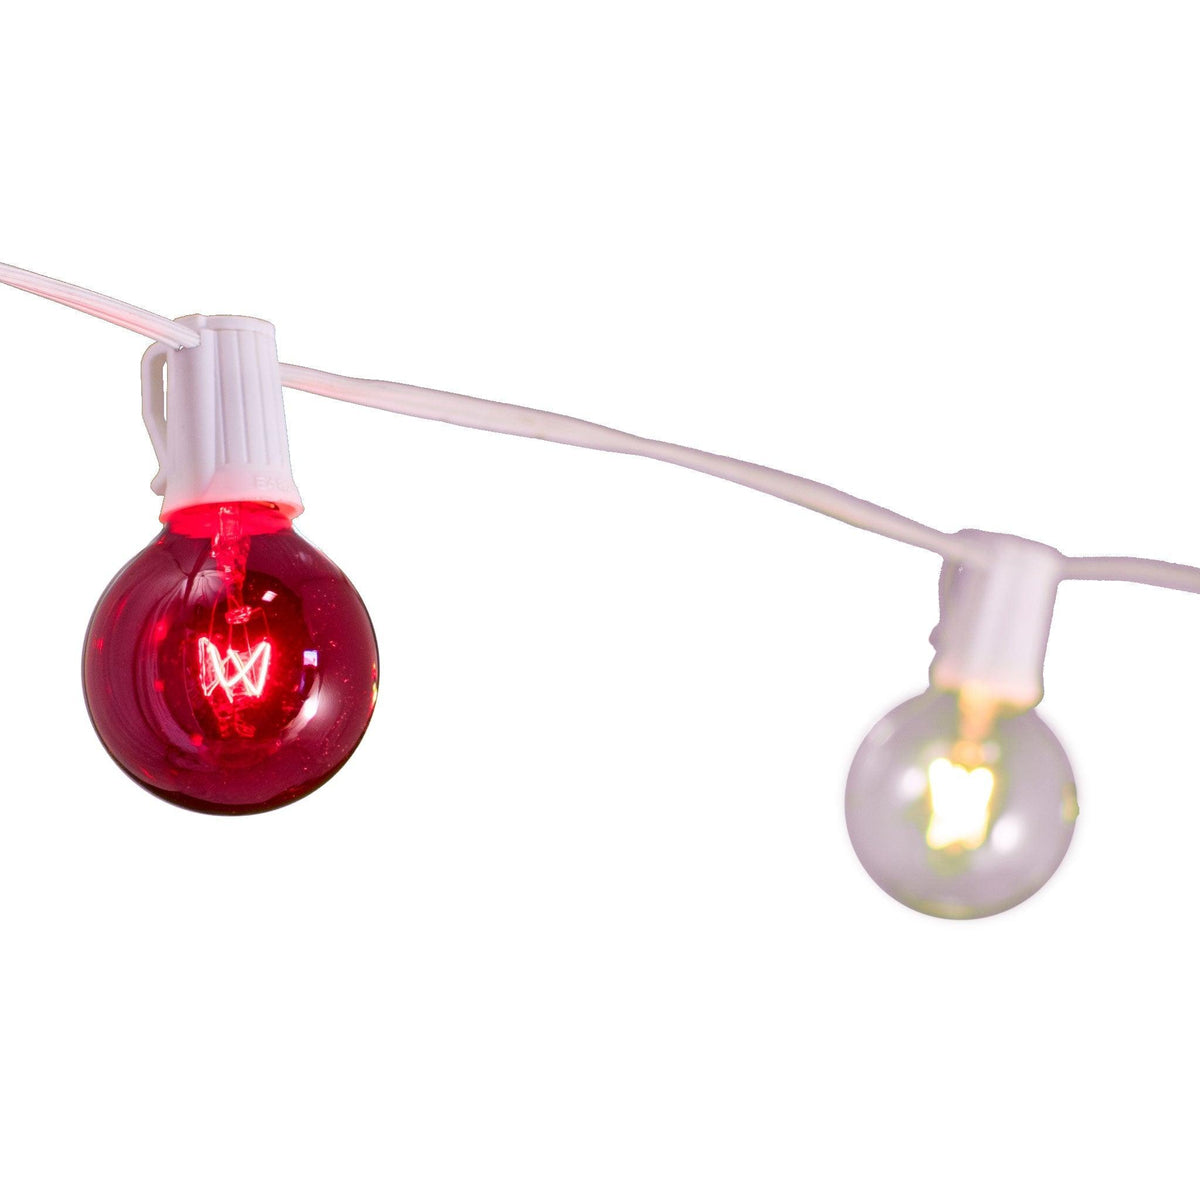 Lee Display's brand new 4th Of July G50 Globe Patio String Lights Set on sale now for the holiday season. Shop at leedisplay.com